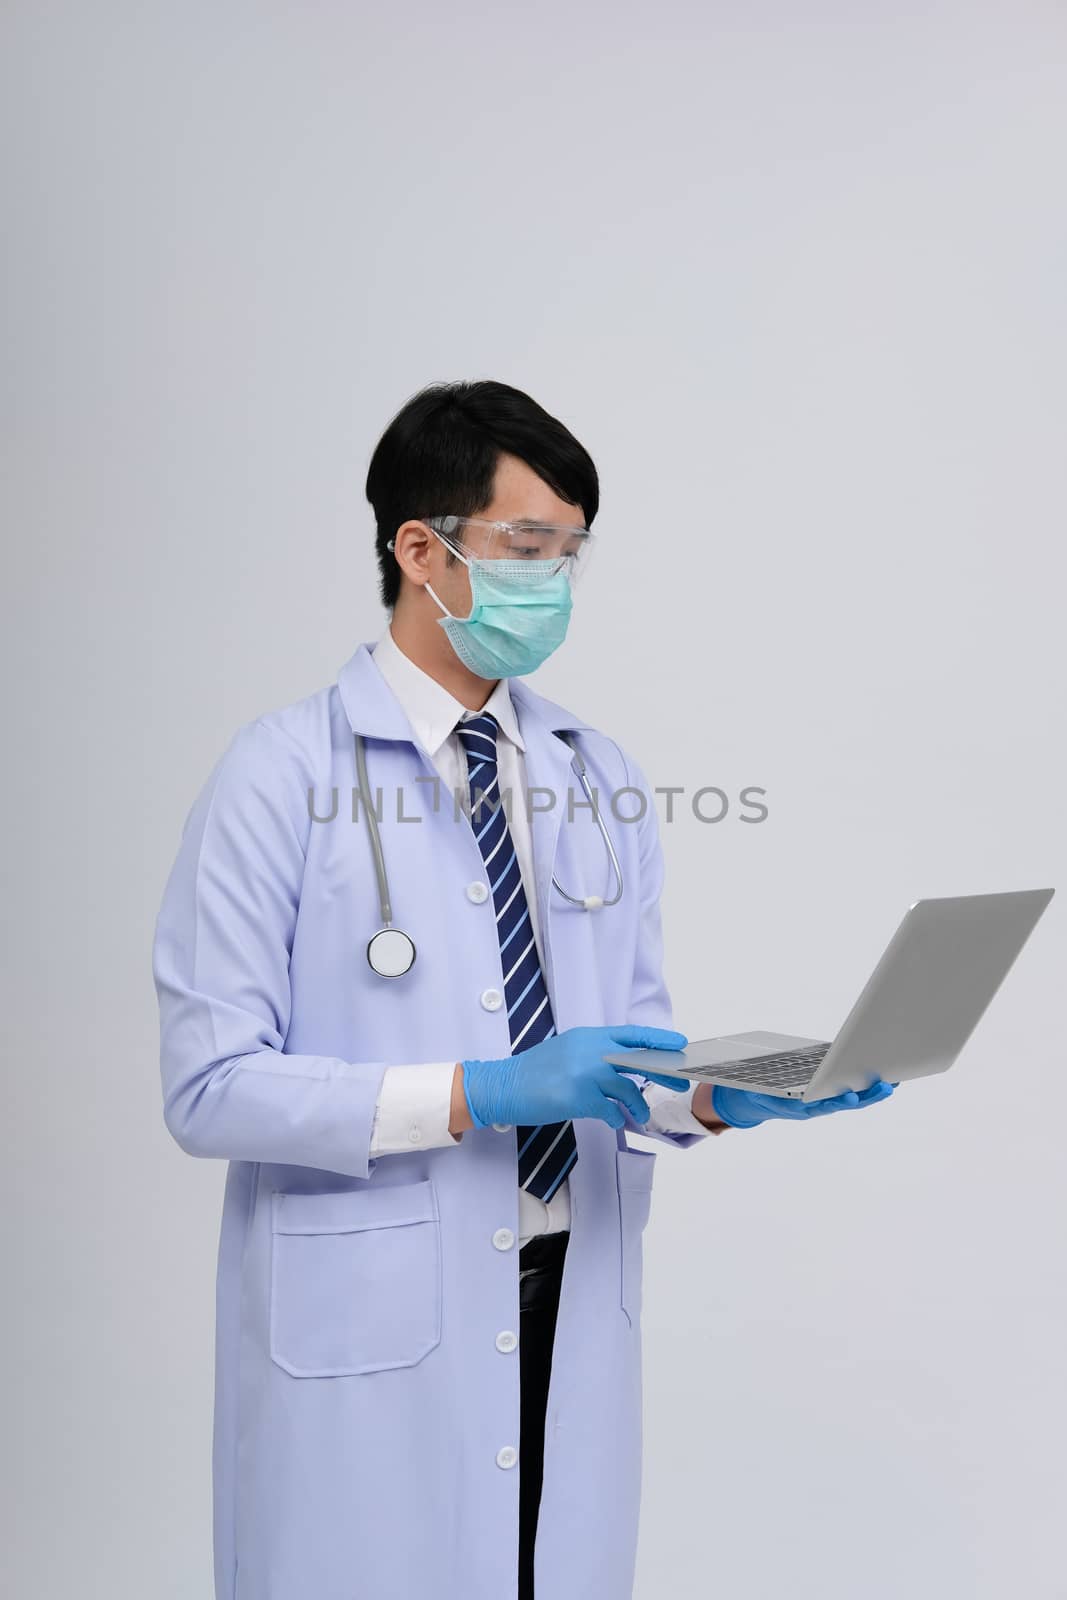 doctor physician practitioner wearing mask with computer & stethoscope on white background. medical professional medicine healthcare concept